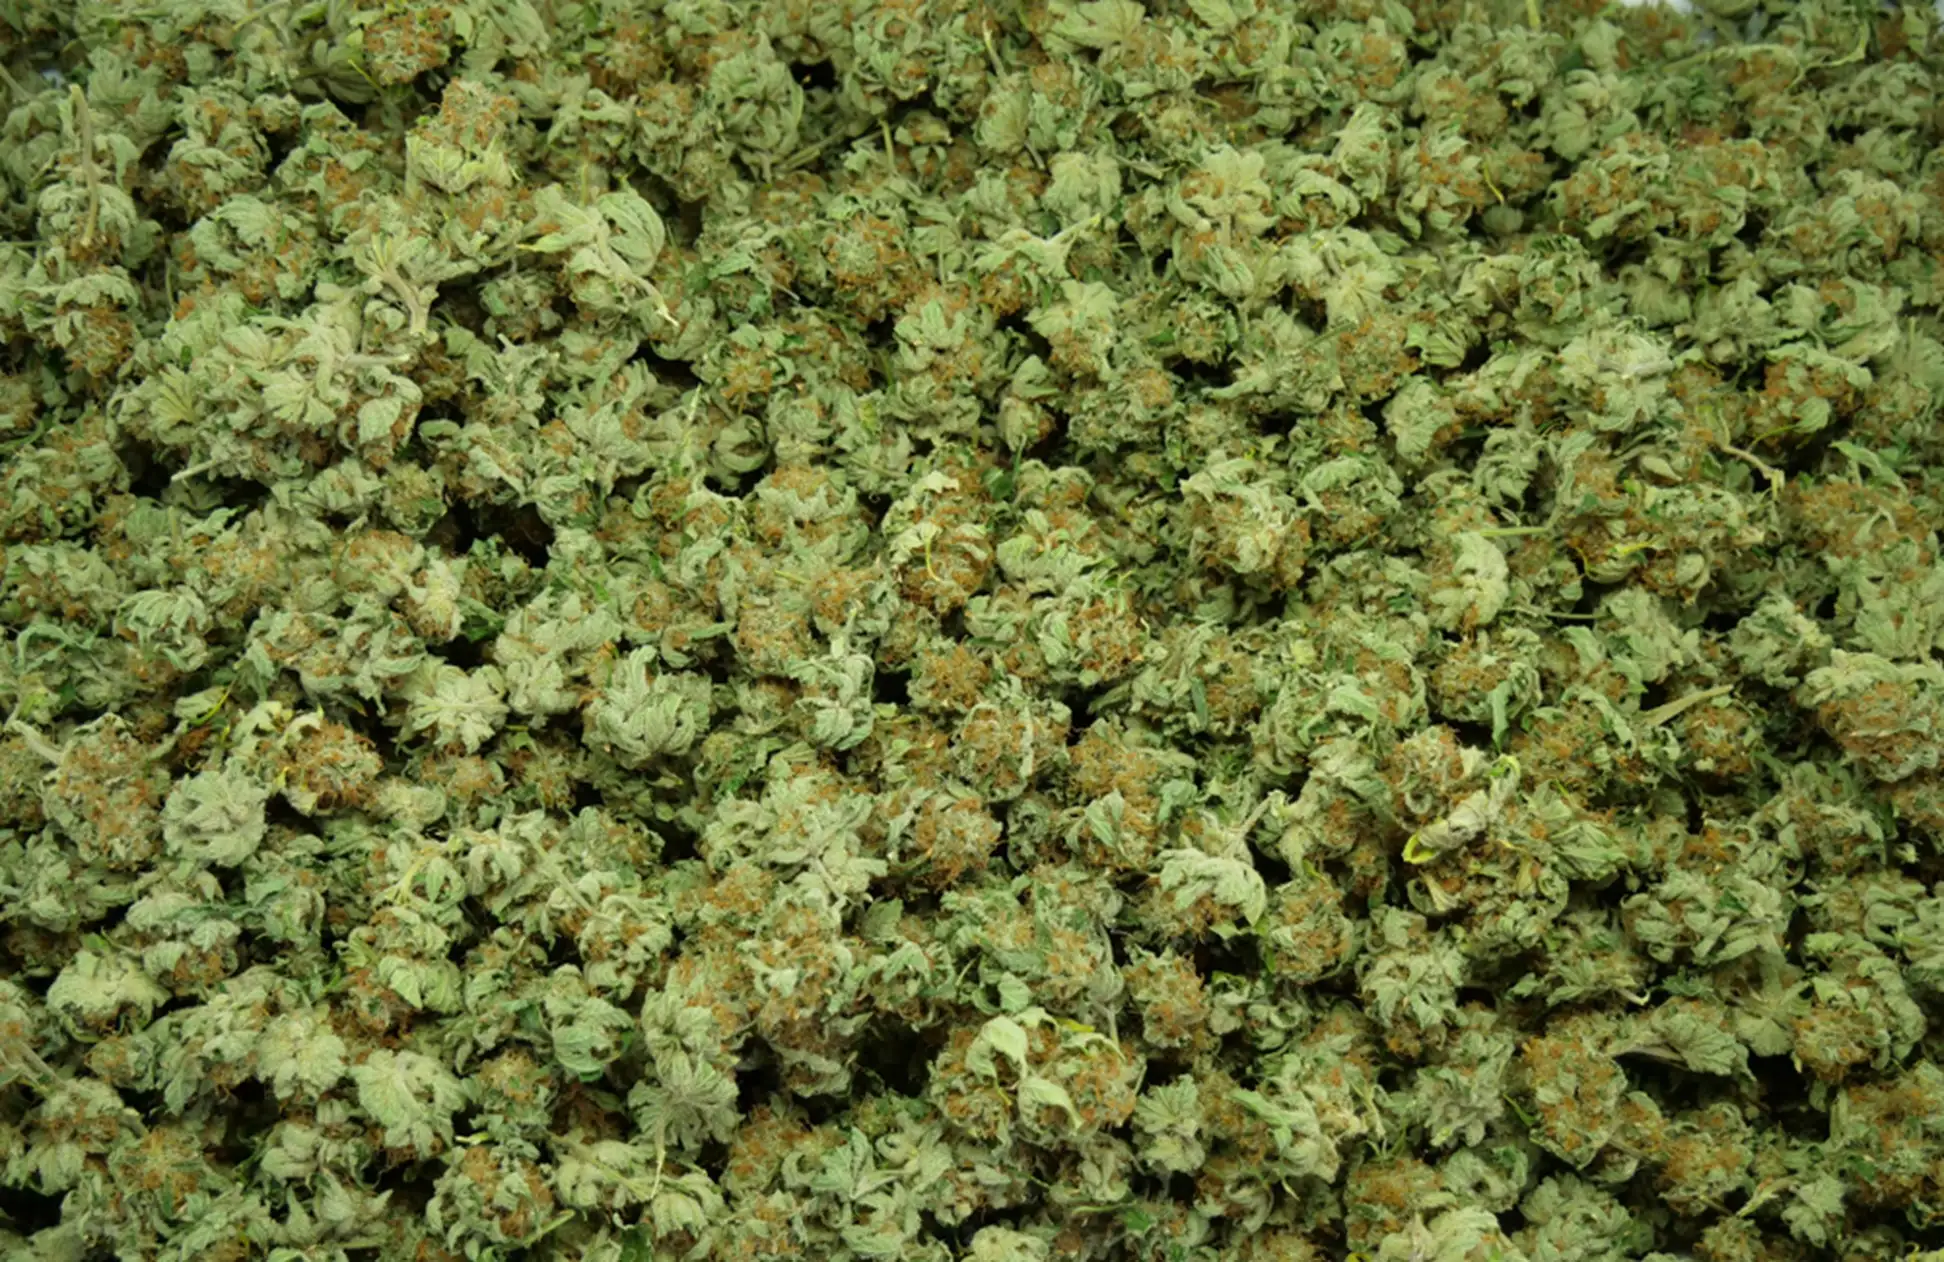 Pile of Cannabis Plant